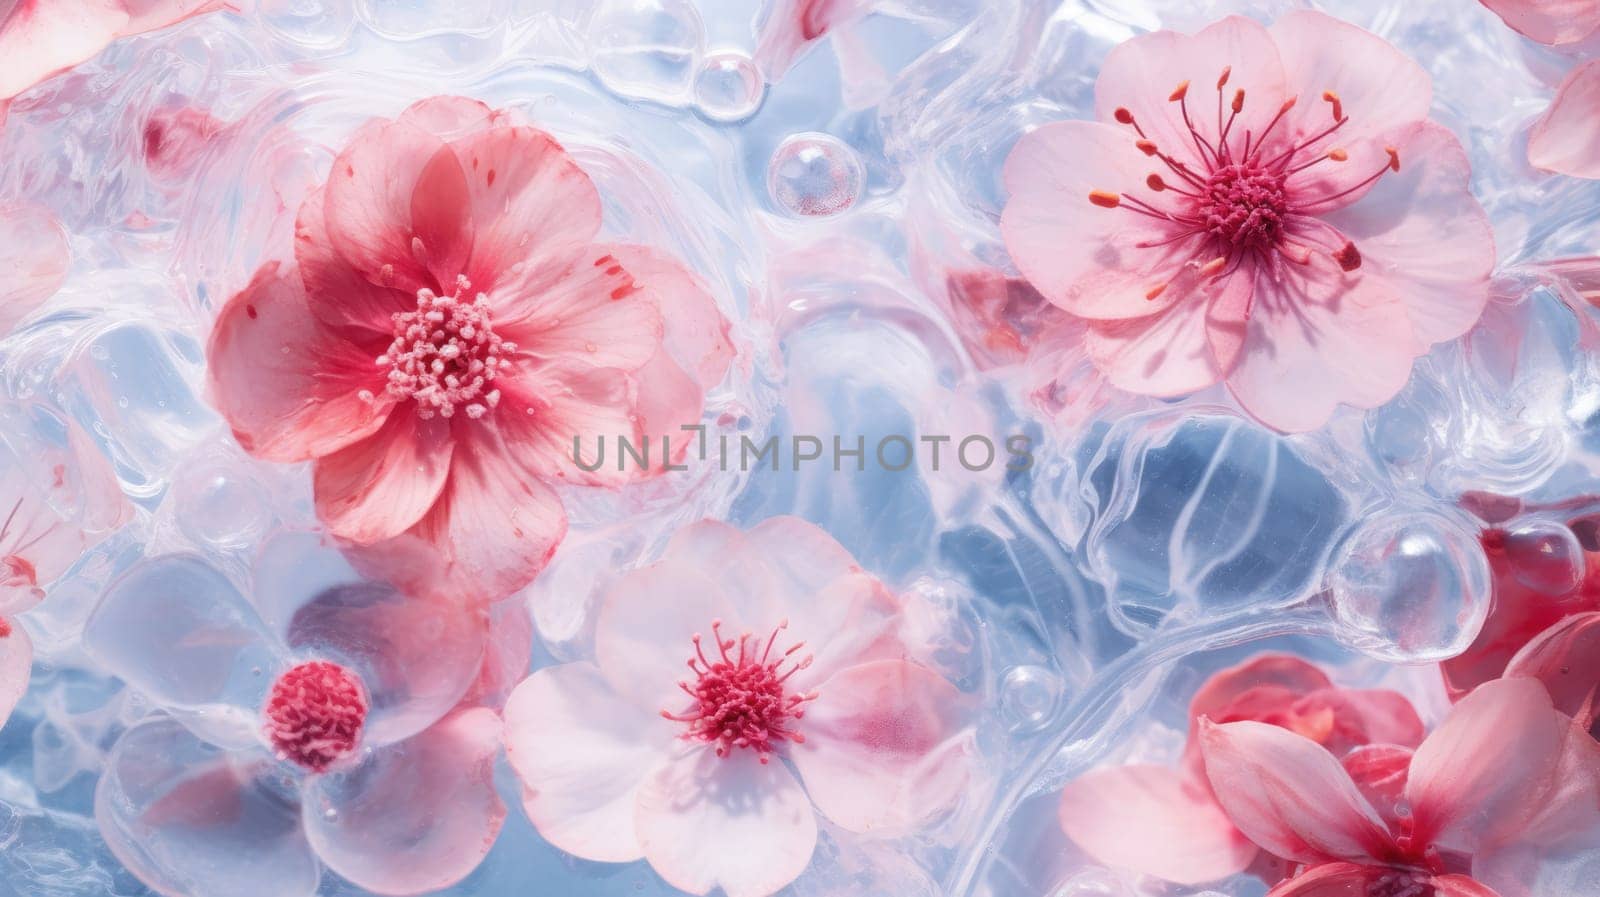 Abstract background of close up of pink and red frozen flowers in ice by natali_brill